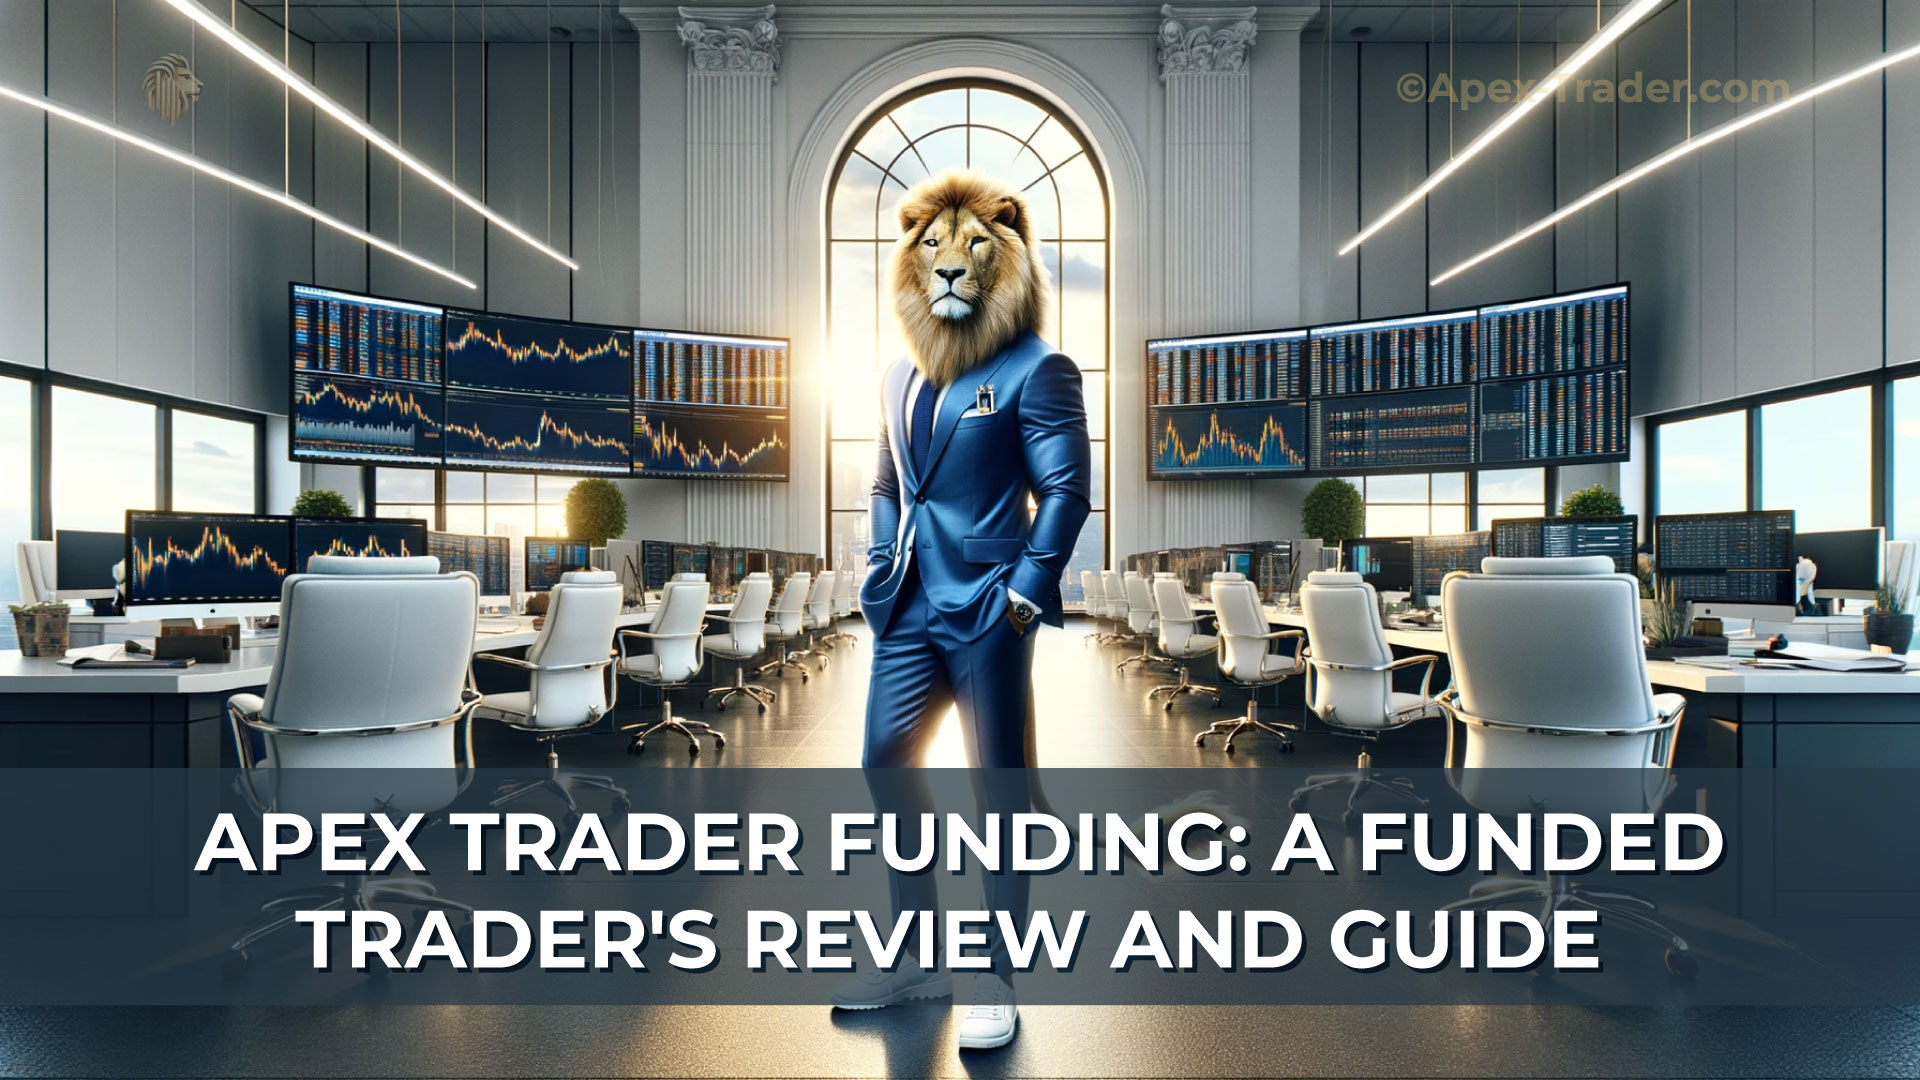 Apex-Trader-Funding-A-Funded-Trader-Review-and-Guide-On-Apex-Trader-Website